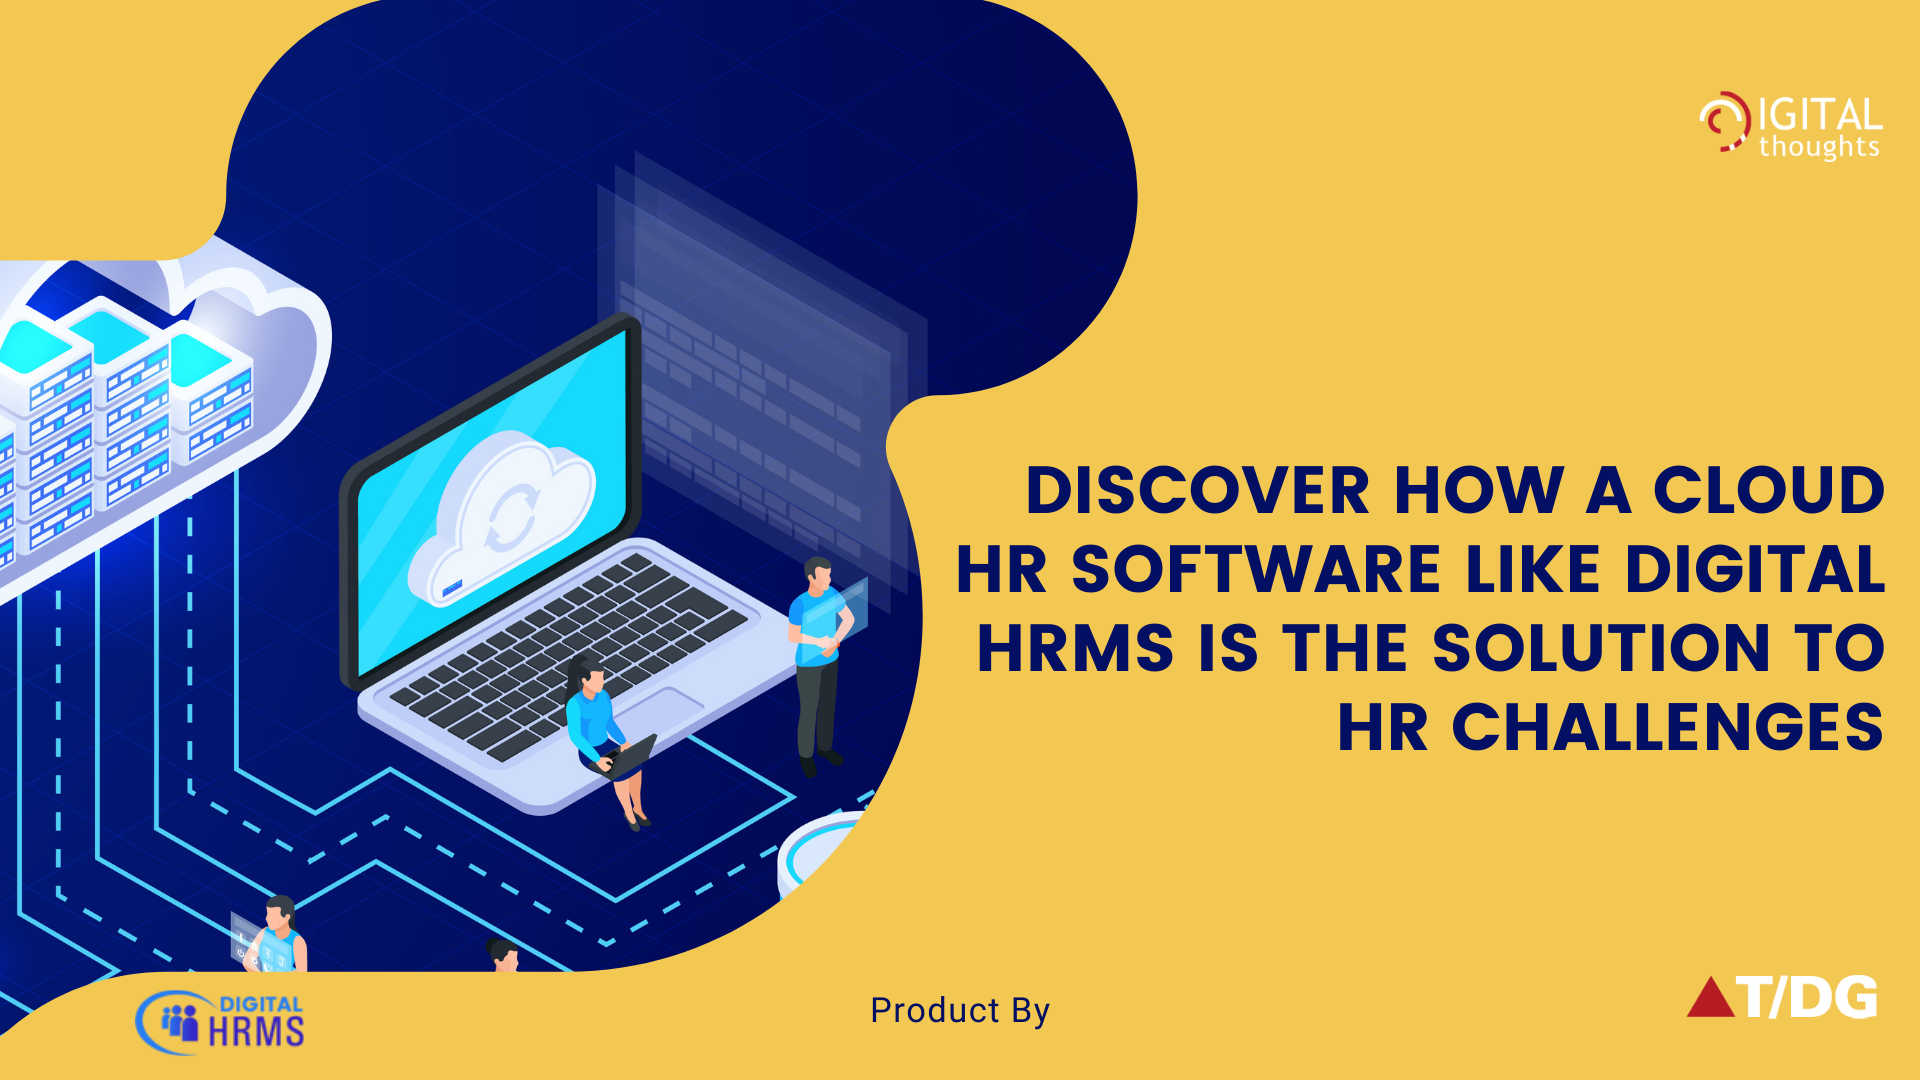 What makes Cloud HR Software the Solution to HR Challenges